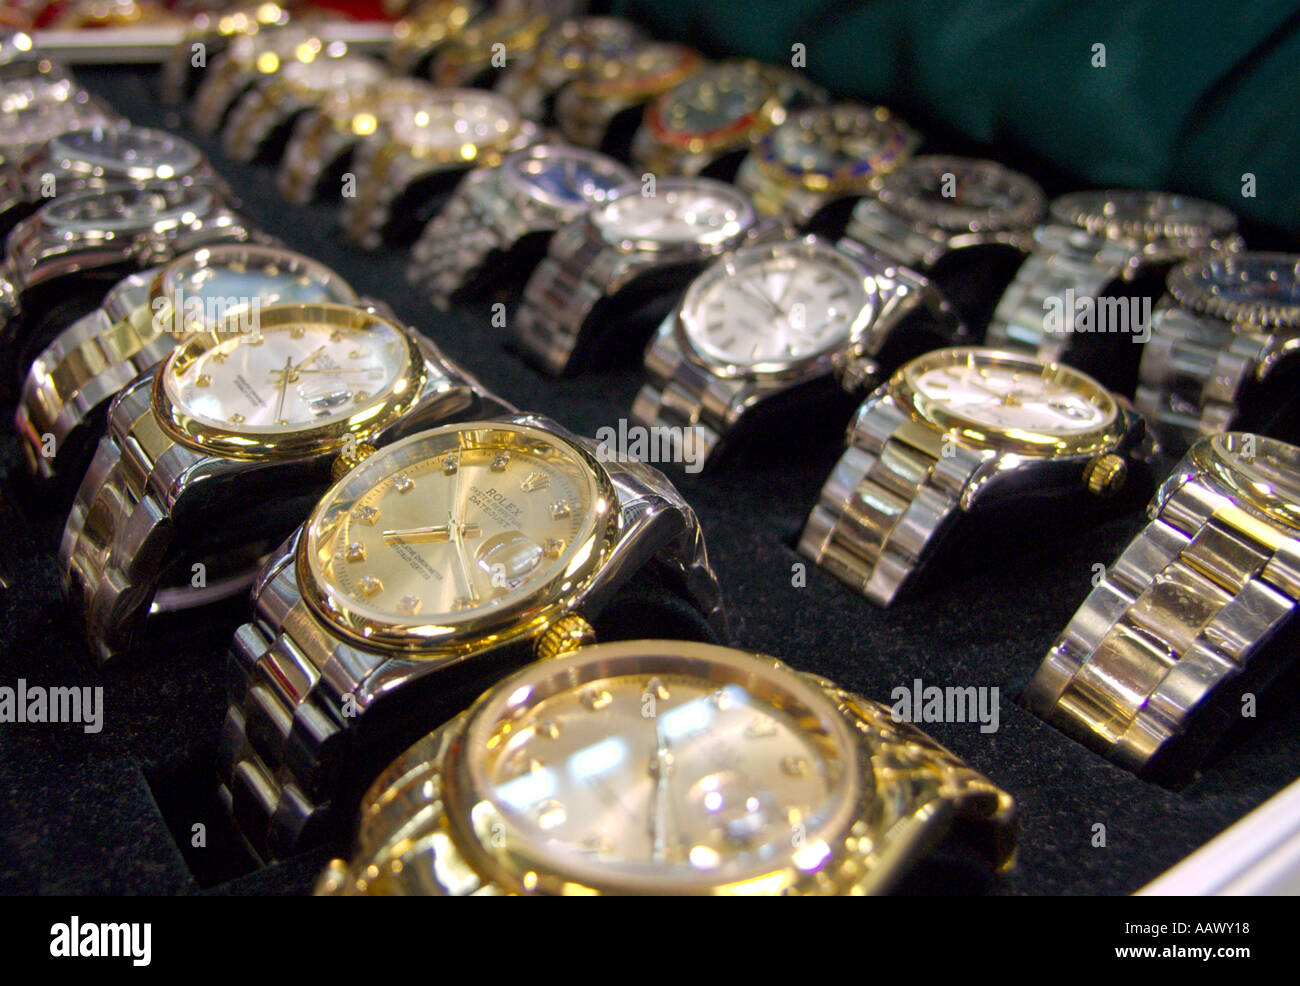 Fake luxury Rolex watches on display in 